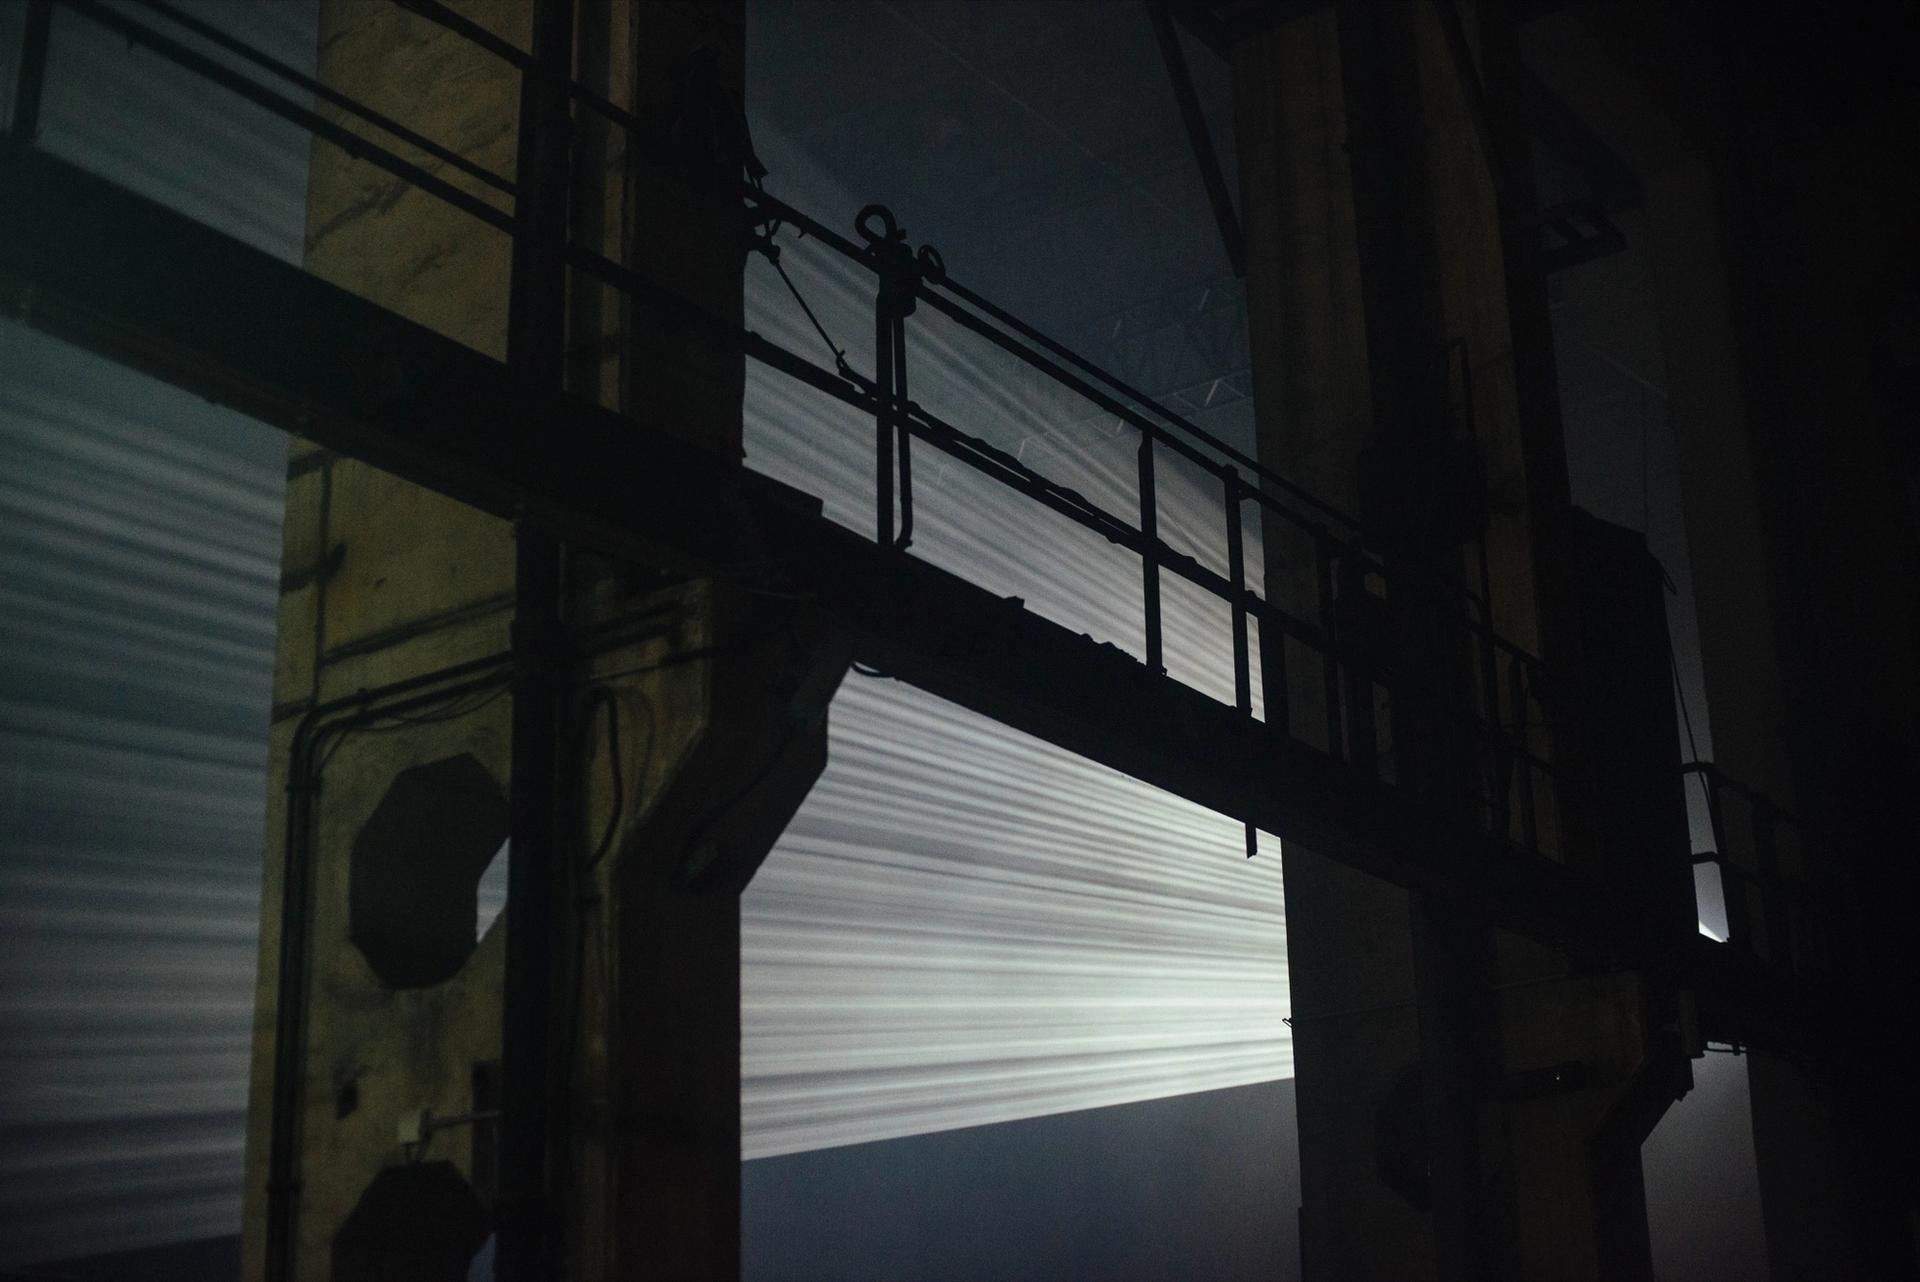 Photo by Camille Blake, courtesy of Berlin Atonal.